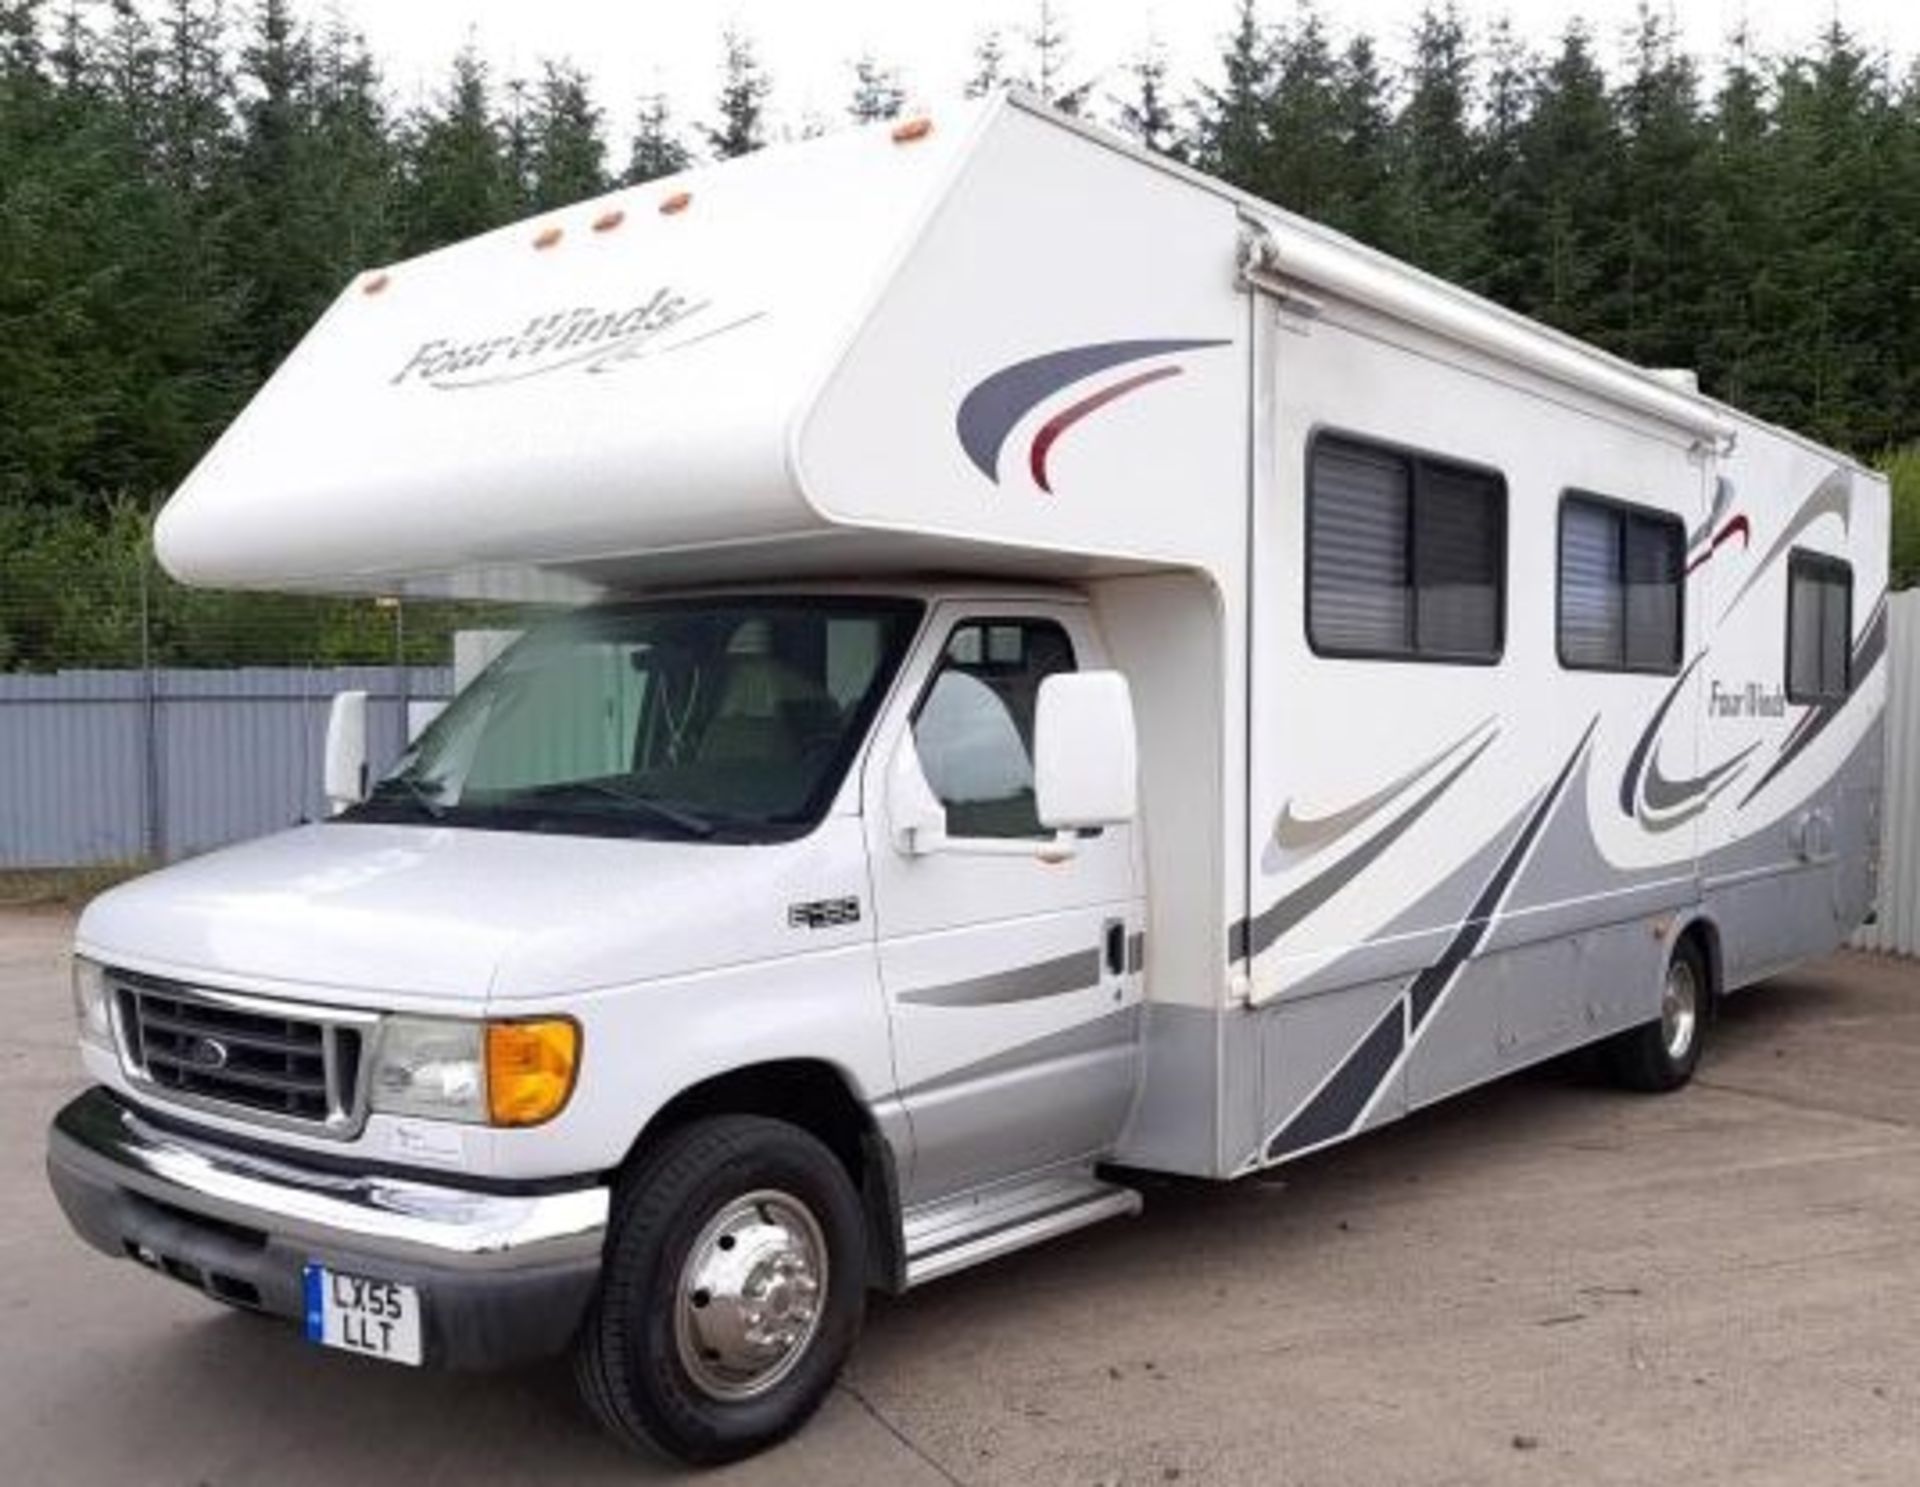 FORD E450 FOURWINDS RV 7 BERTH LHD MOTORHOME, VERY LOW MILEAGE 34,453 MILES *NO VAT*